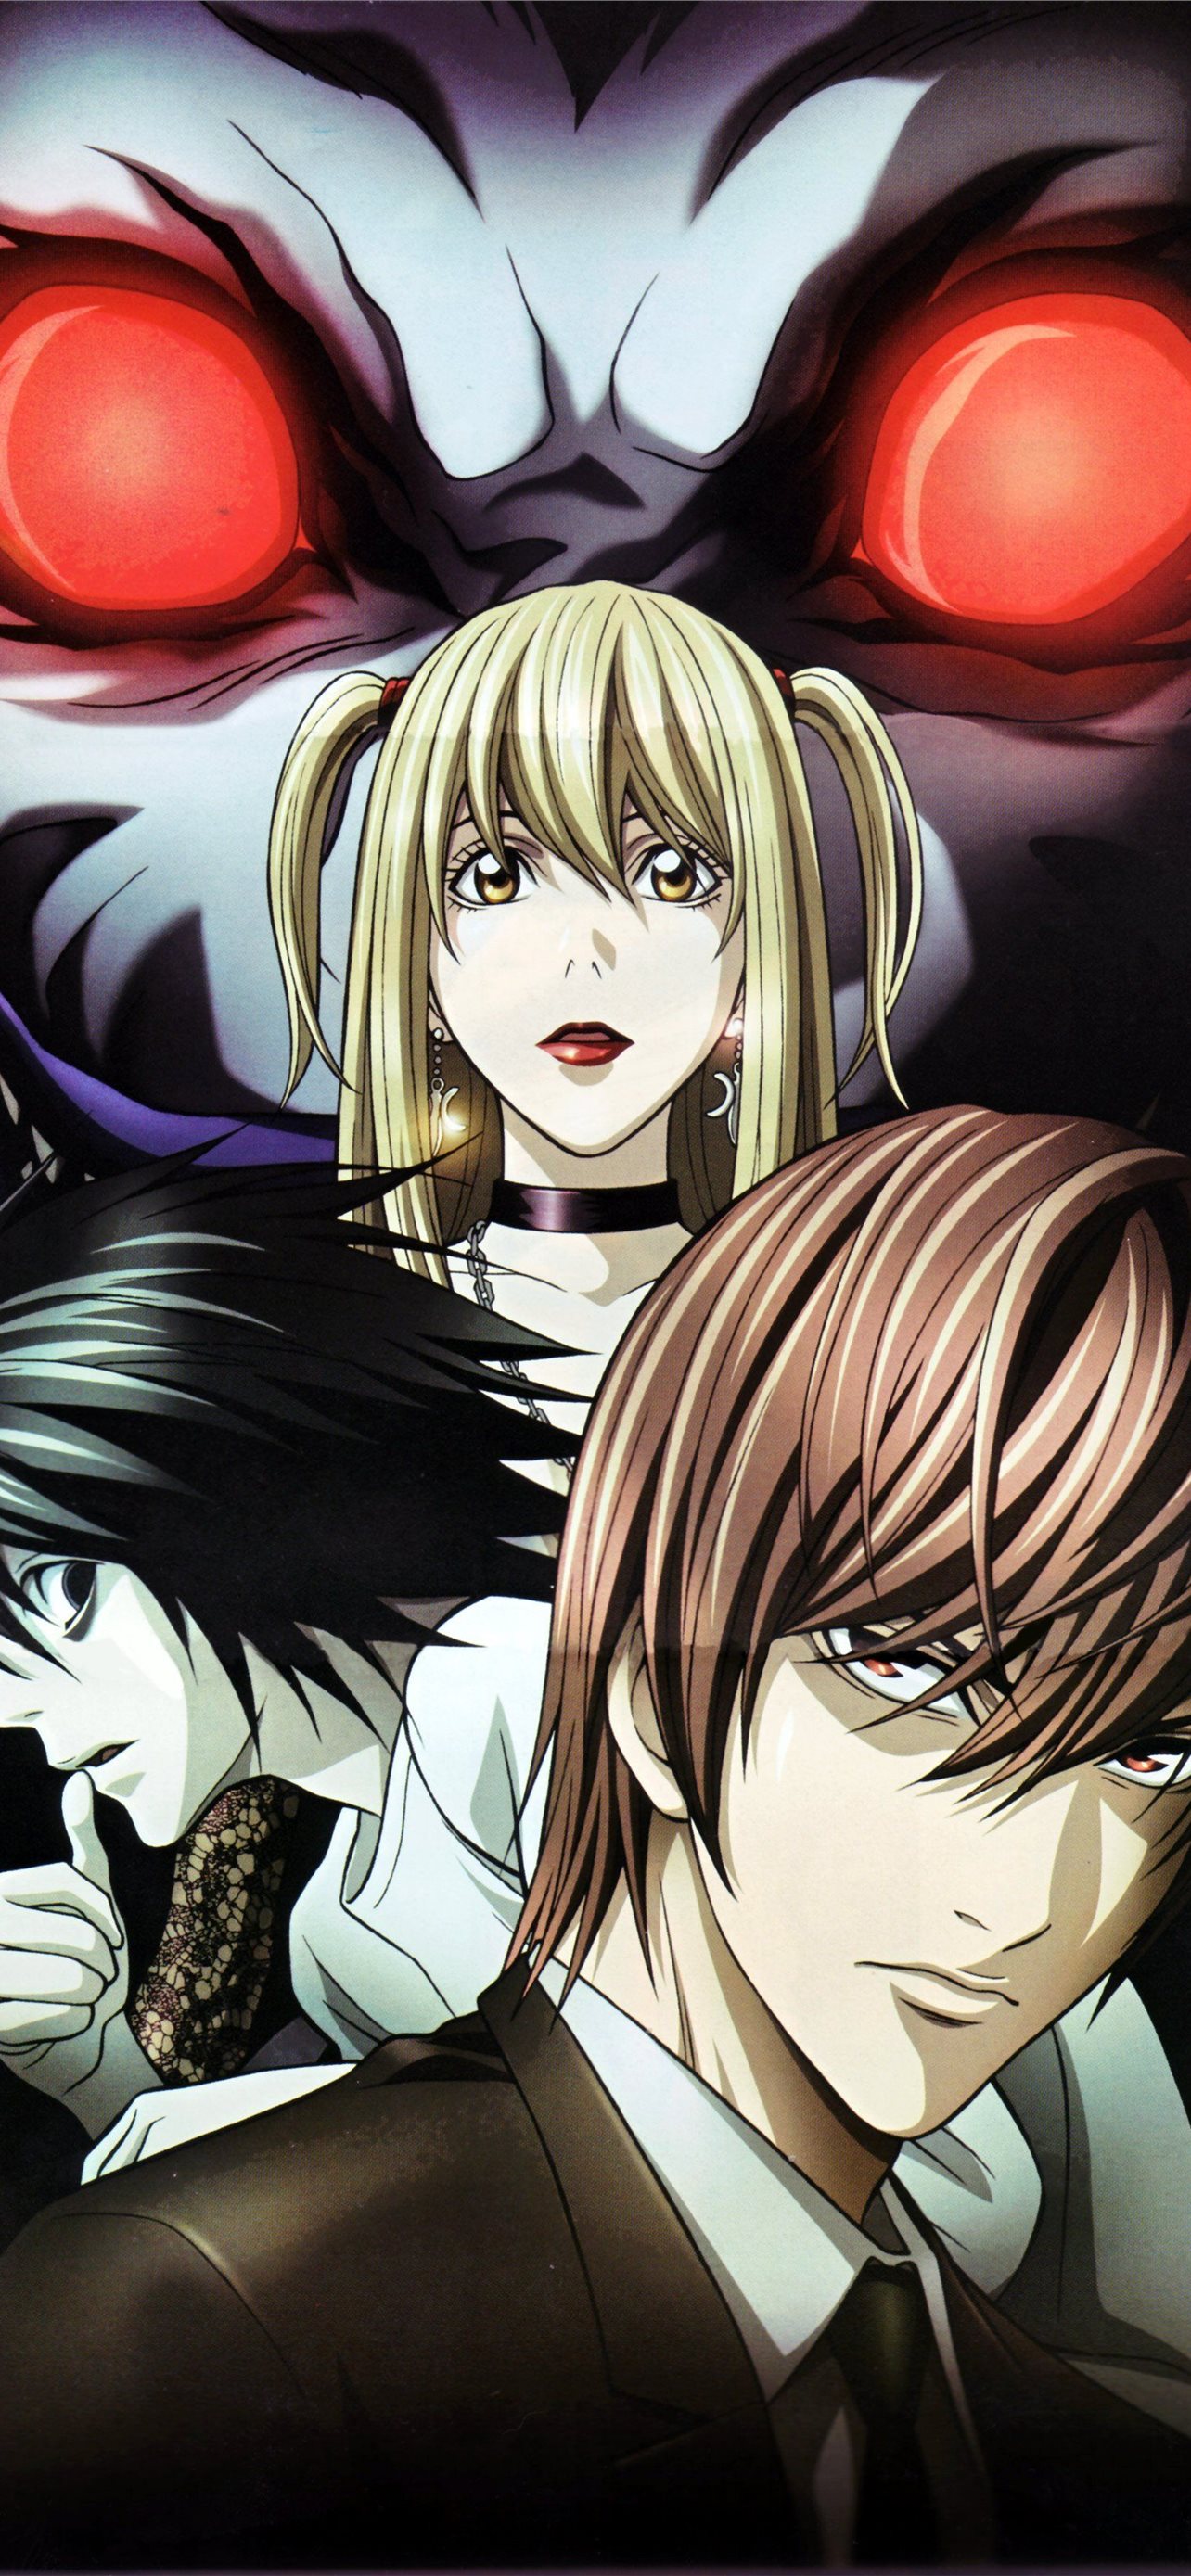 Death note anime Wallpapers Download | MobCup